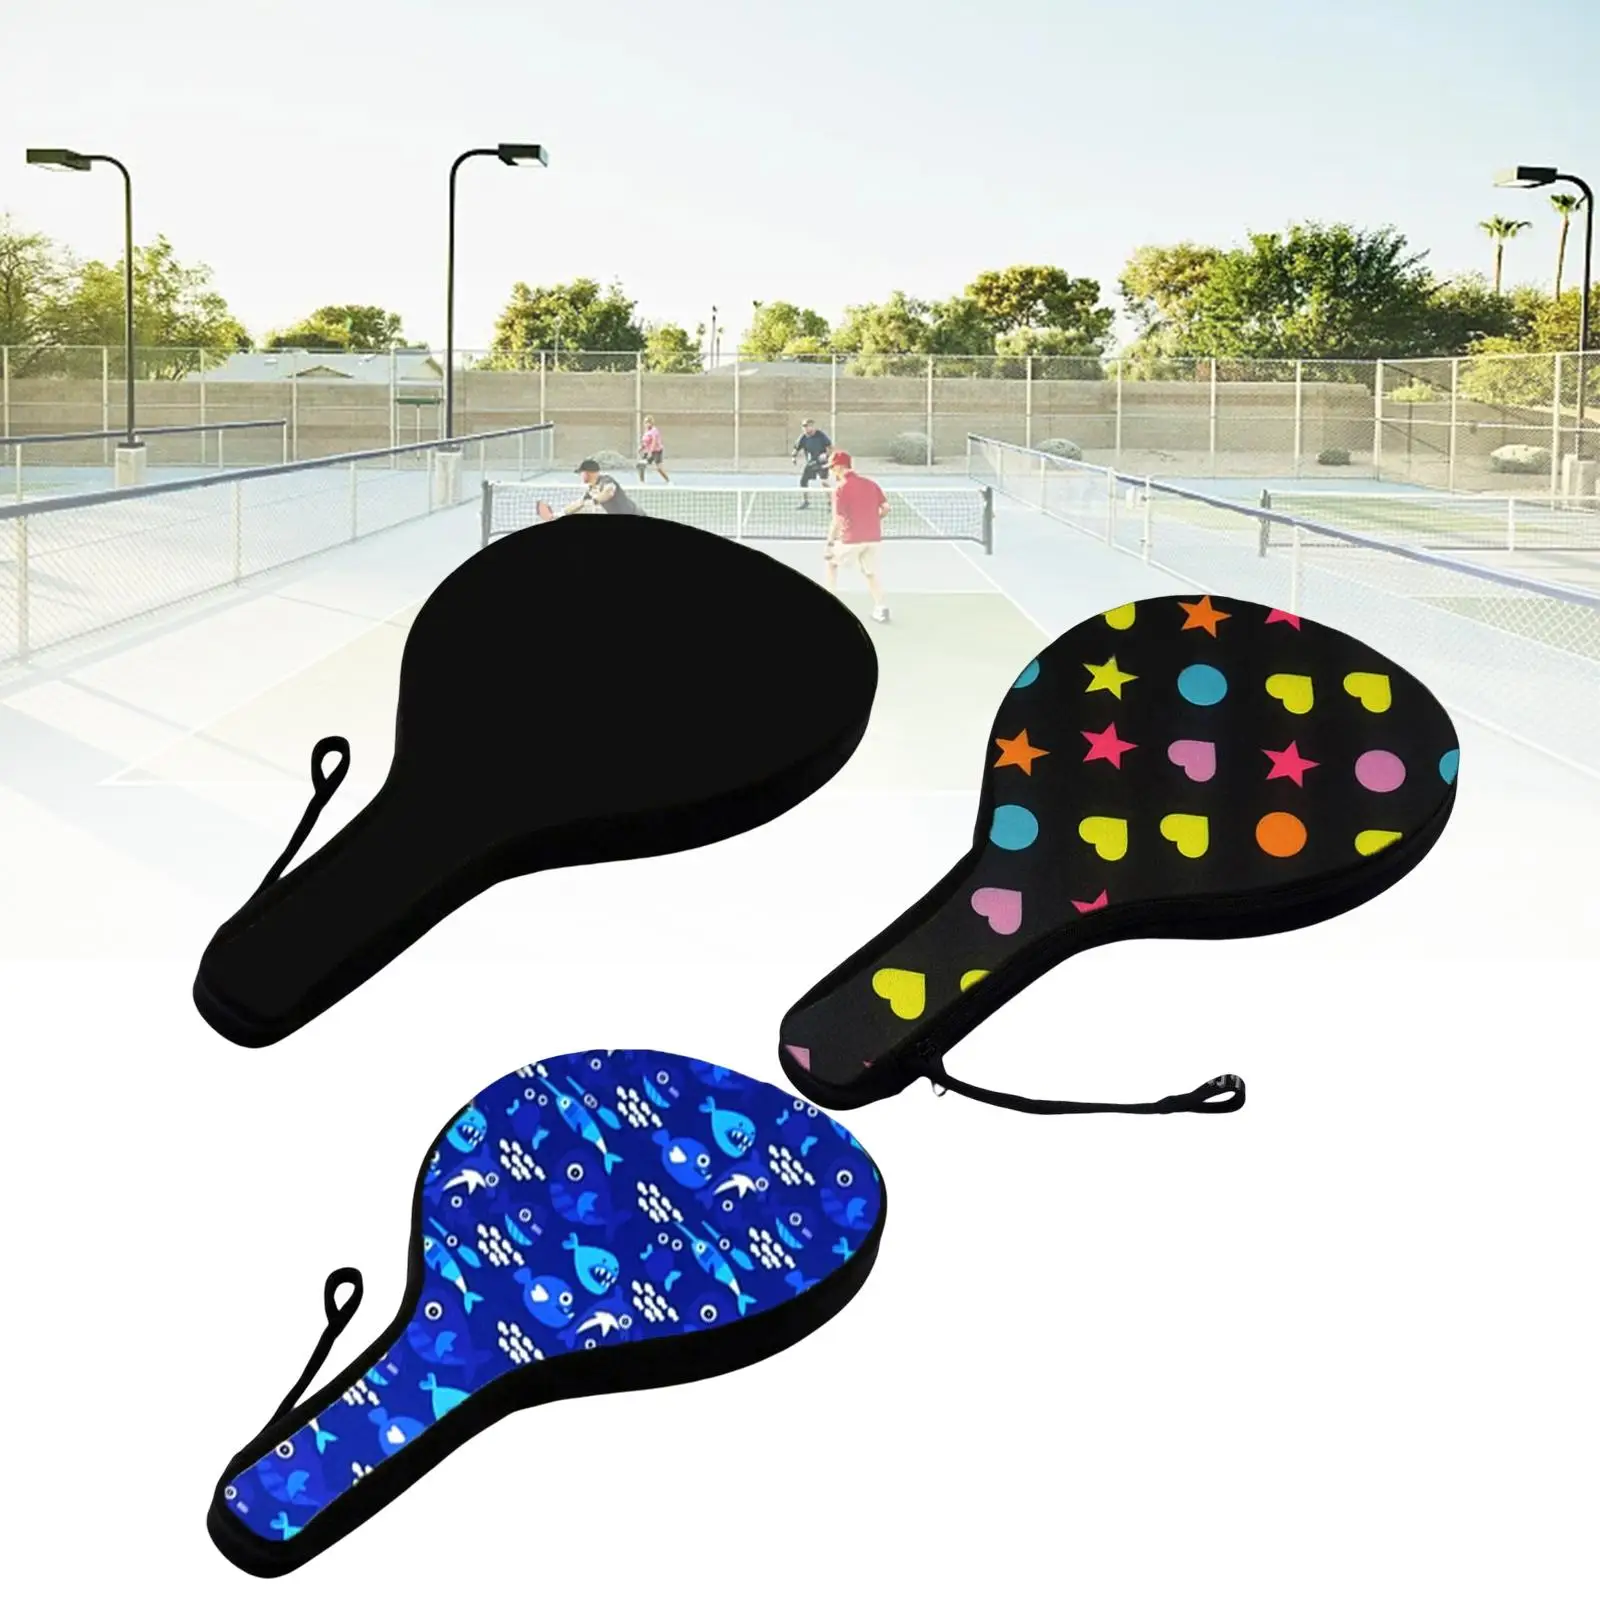 Neoprene Pickleball Paddle Bag Racket Case Cover Storage Carrier Storage Protective Sleeve Zipper Pouch Holder Accessories Gift